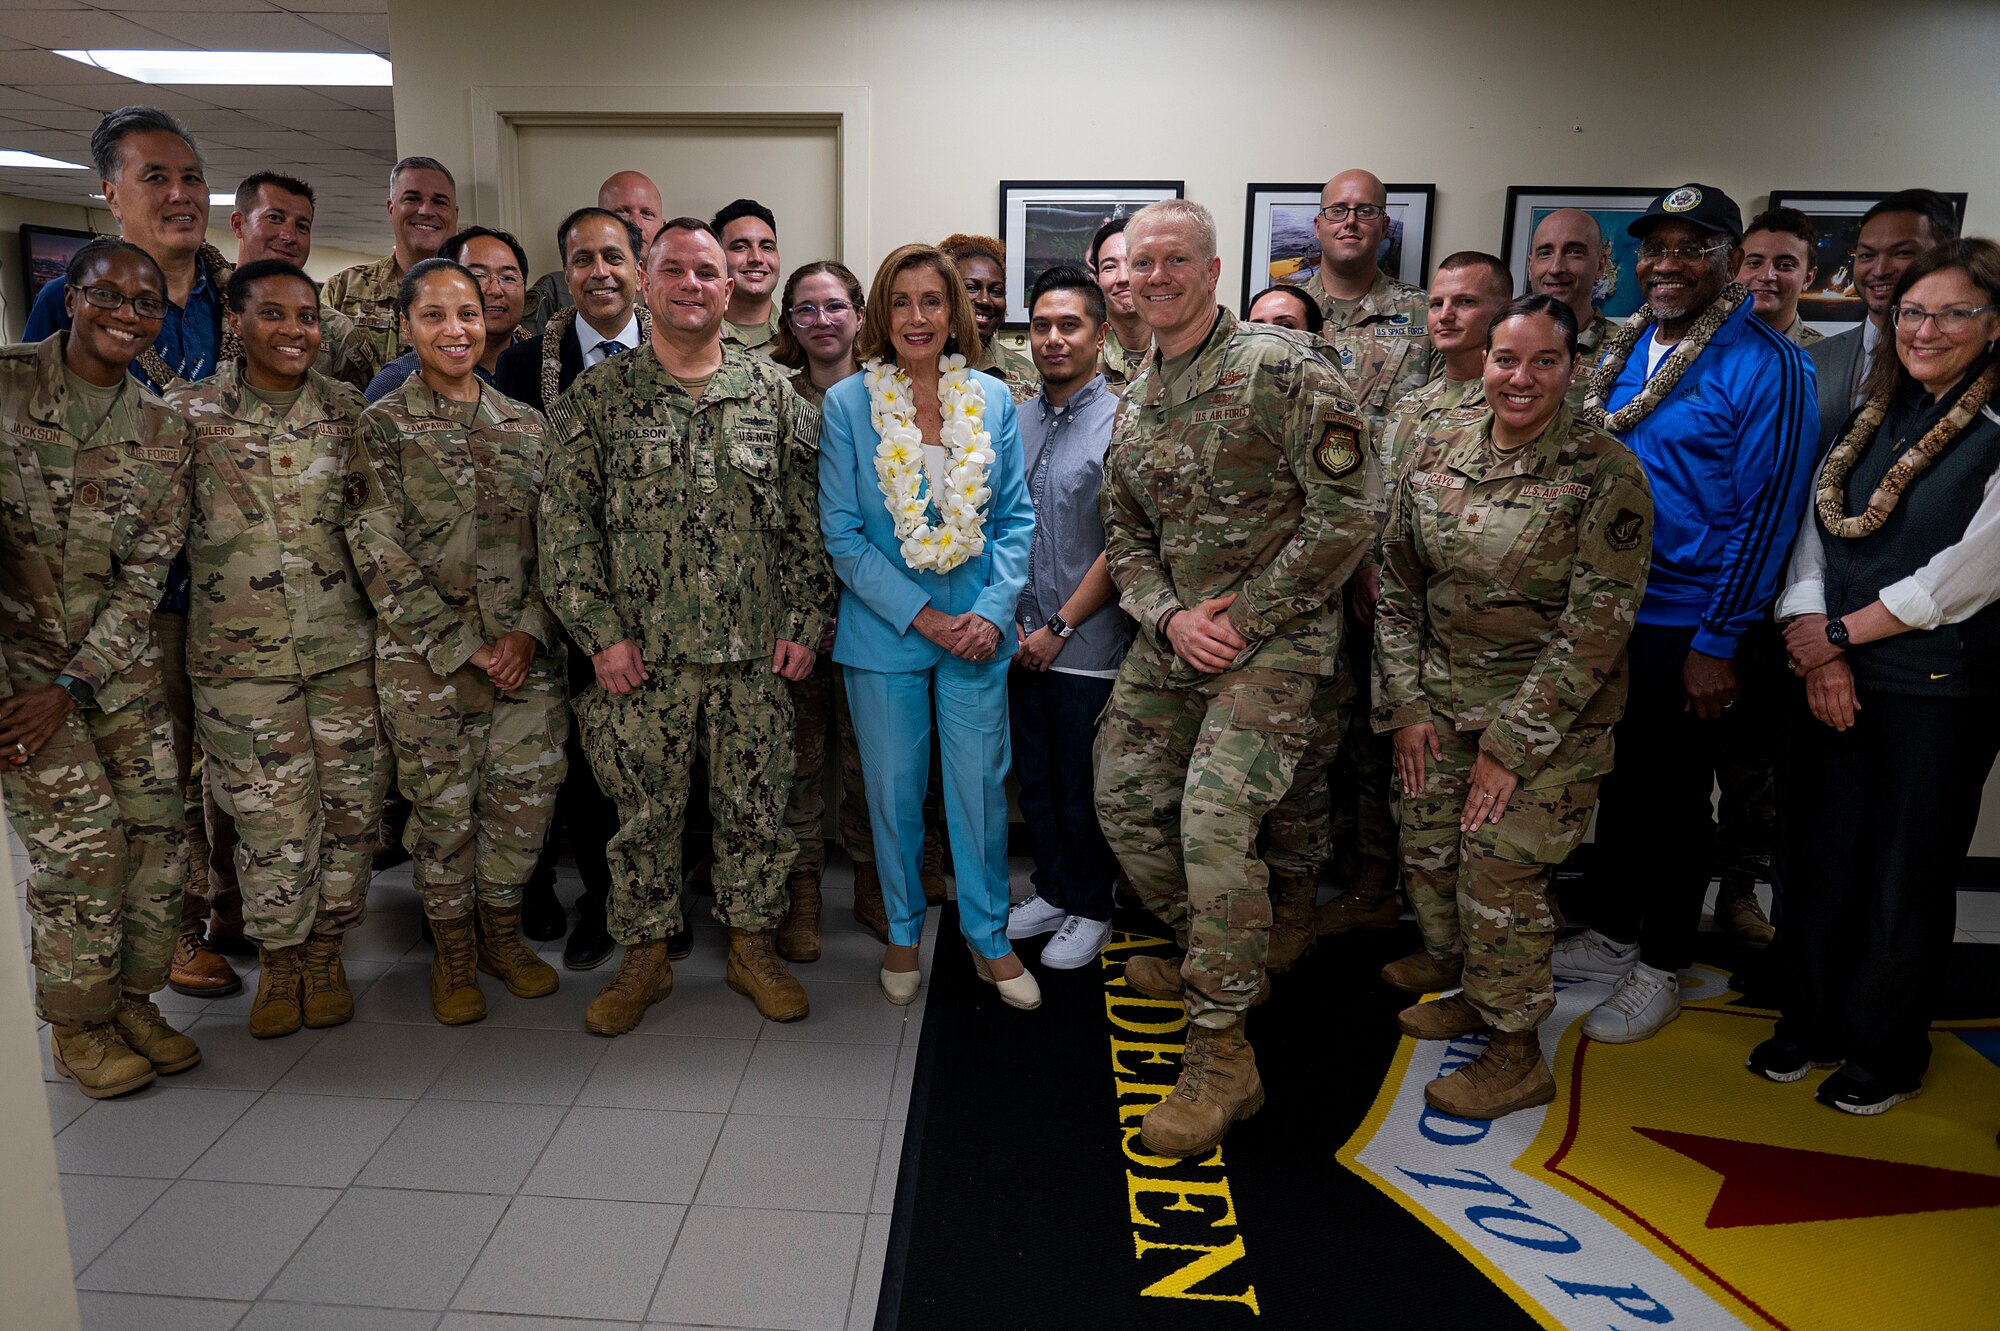 Congressional delegates take a group photo with Airmen, Sailors and Guardians during a visit at Andersen Air Force Base, Guam, July 31, 2022. Speaker of the U.S. House of Representatives Nancy Pelosi’s visit focused on bilateral relationships, security cooperation and climate change. (U.S. Air Force photo by Staff Sgt. Suzie Plotnikov)